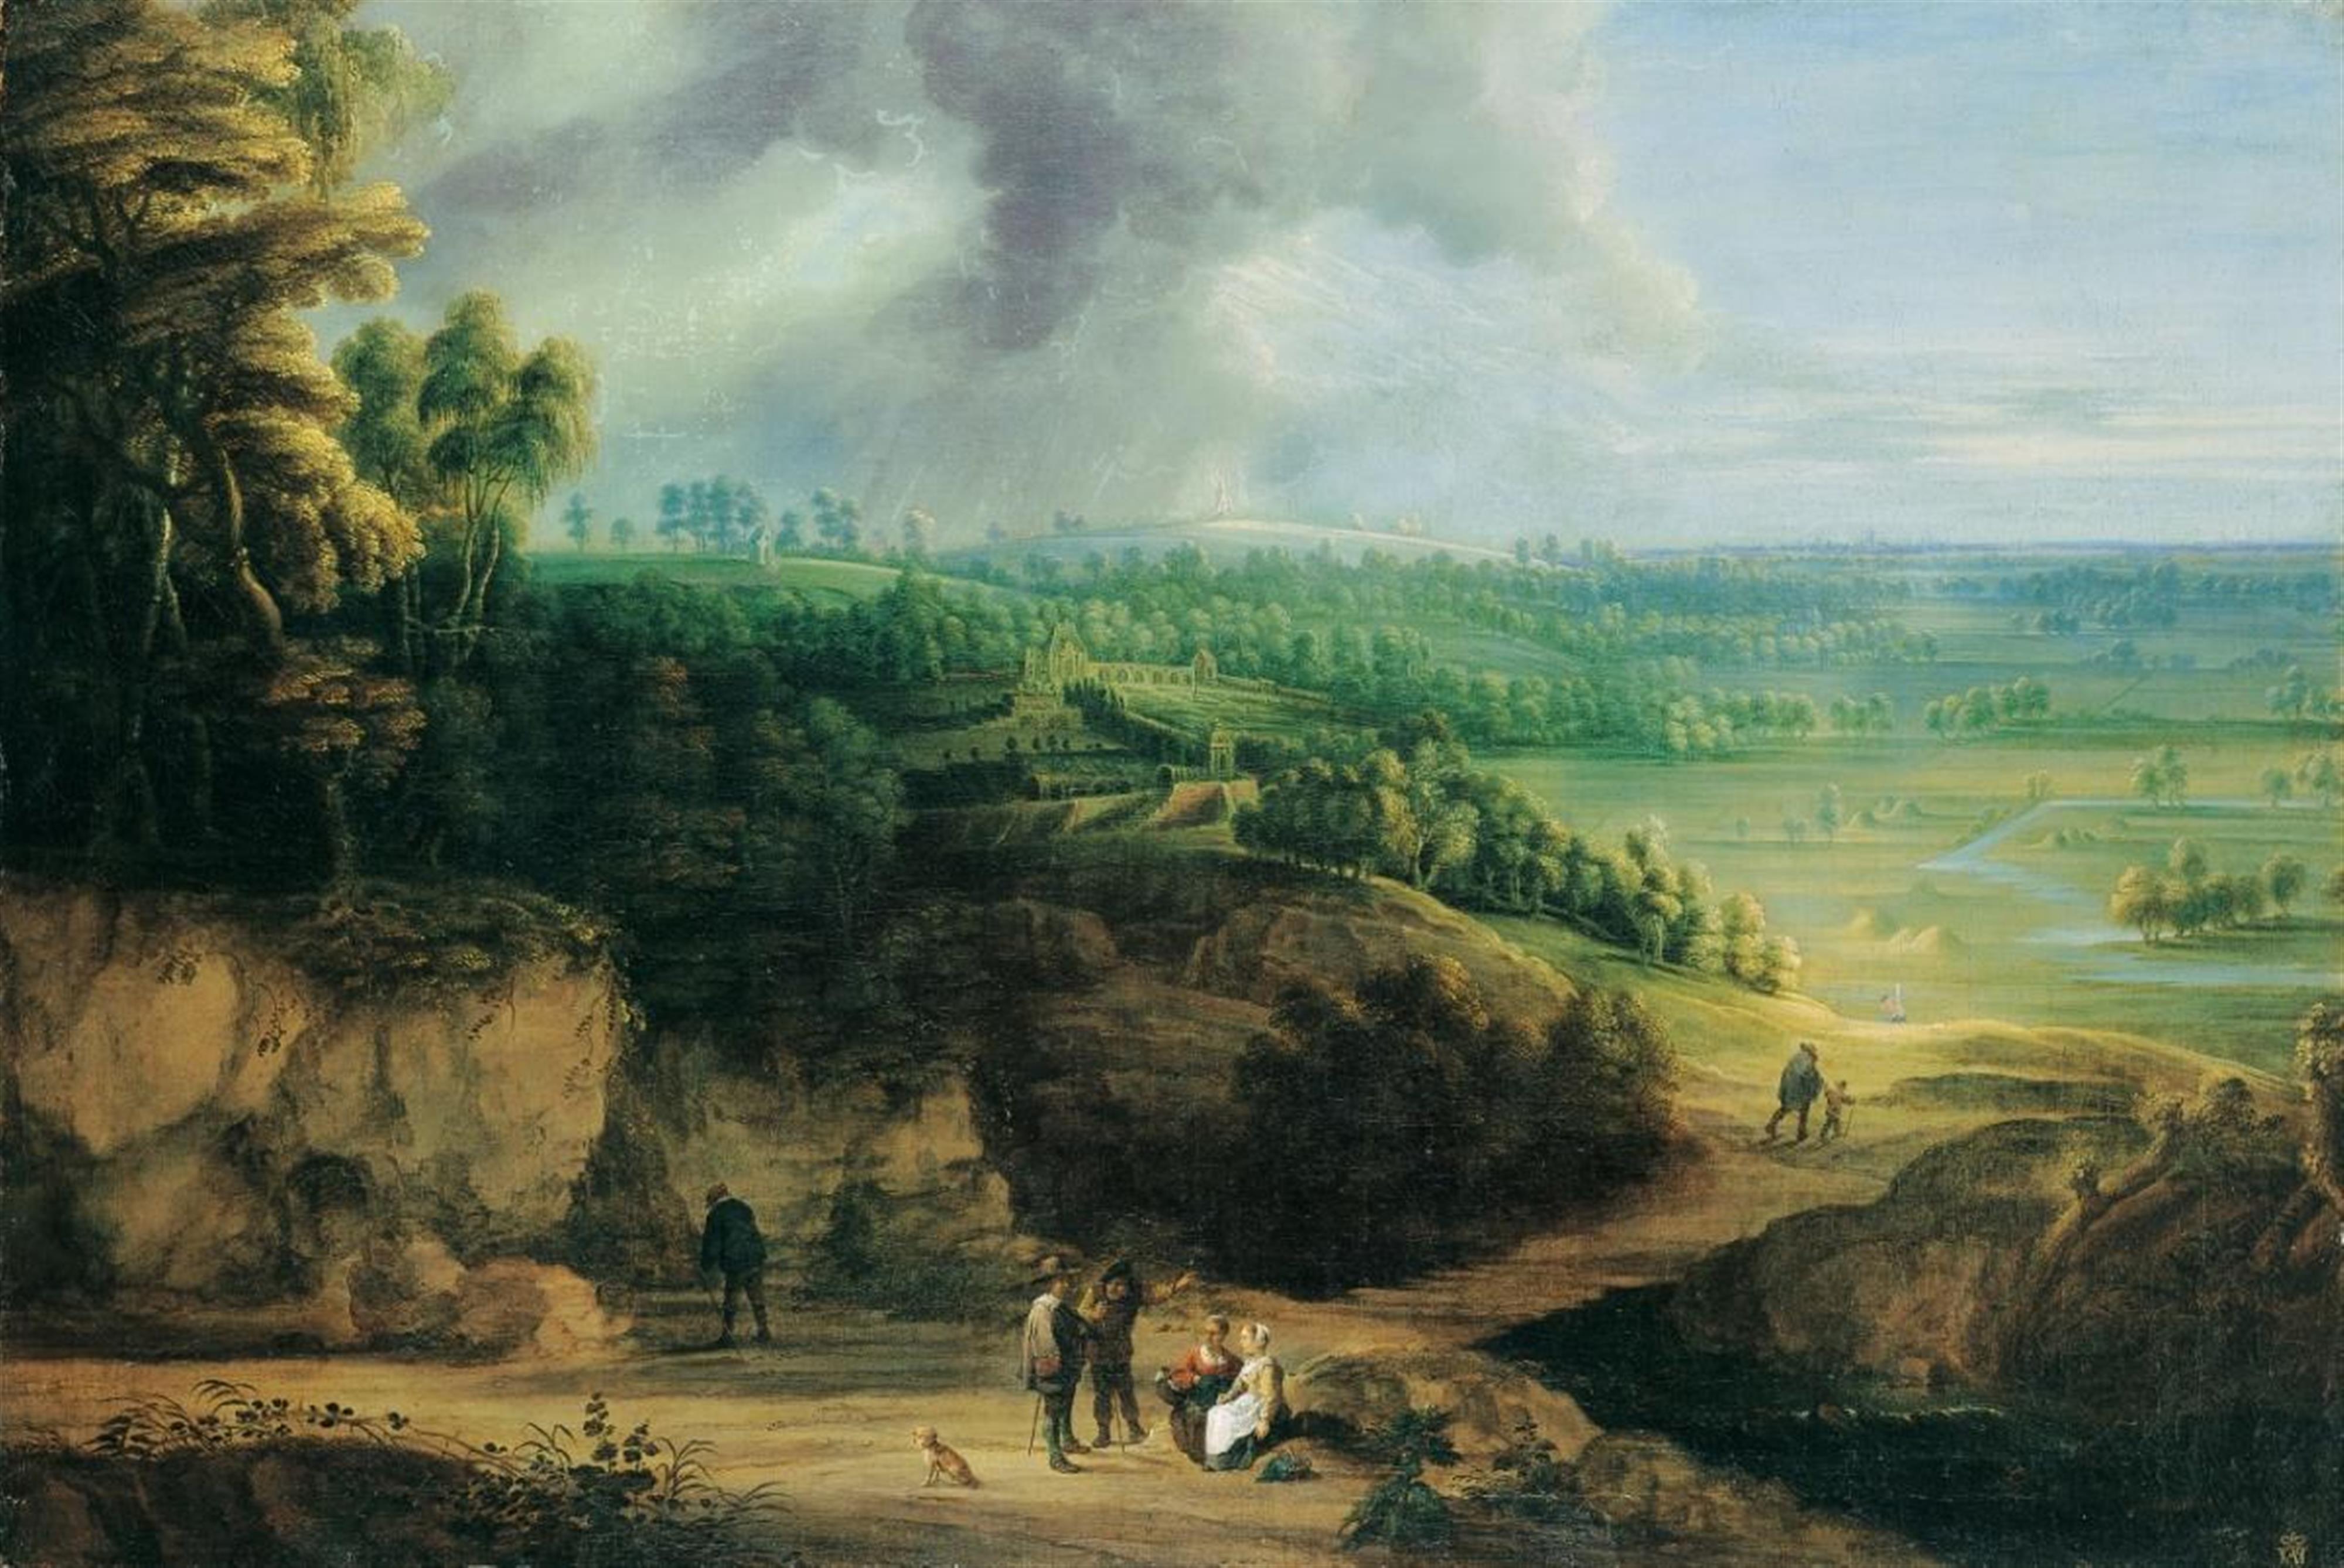 Lucas van Uden and DAVID TENIERS THE YOUNGER - PANORAMIC LANDSCAPE WITH CASTLE AND FIGURES - image-3